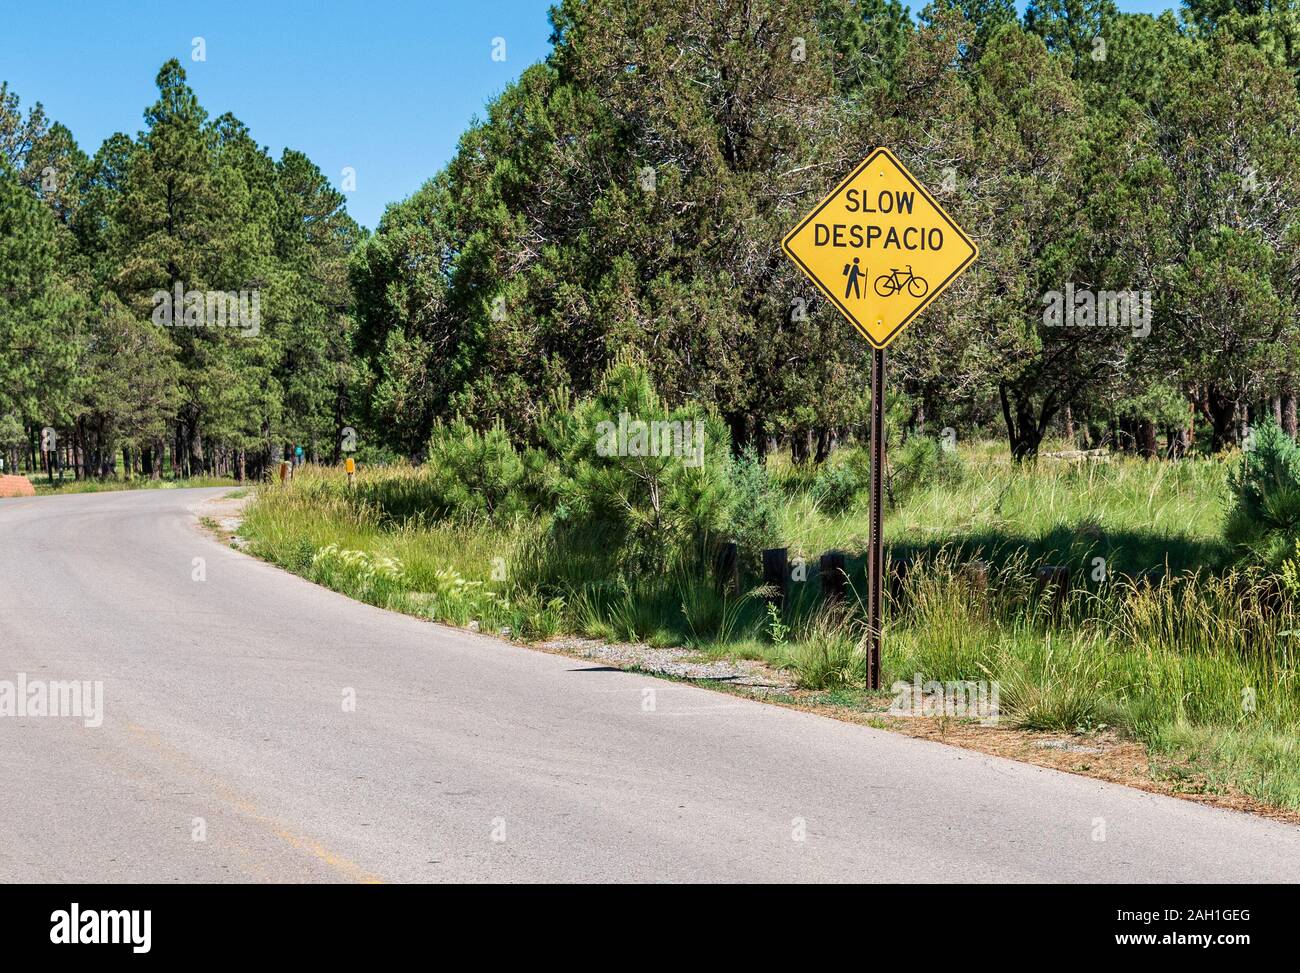 Bilingual sign, road sign in English and Spanish, New Mexico, USA. Stock Photo